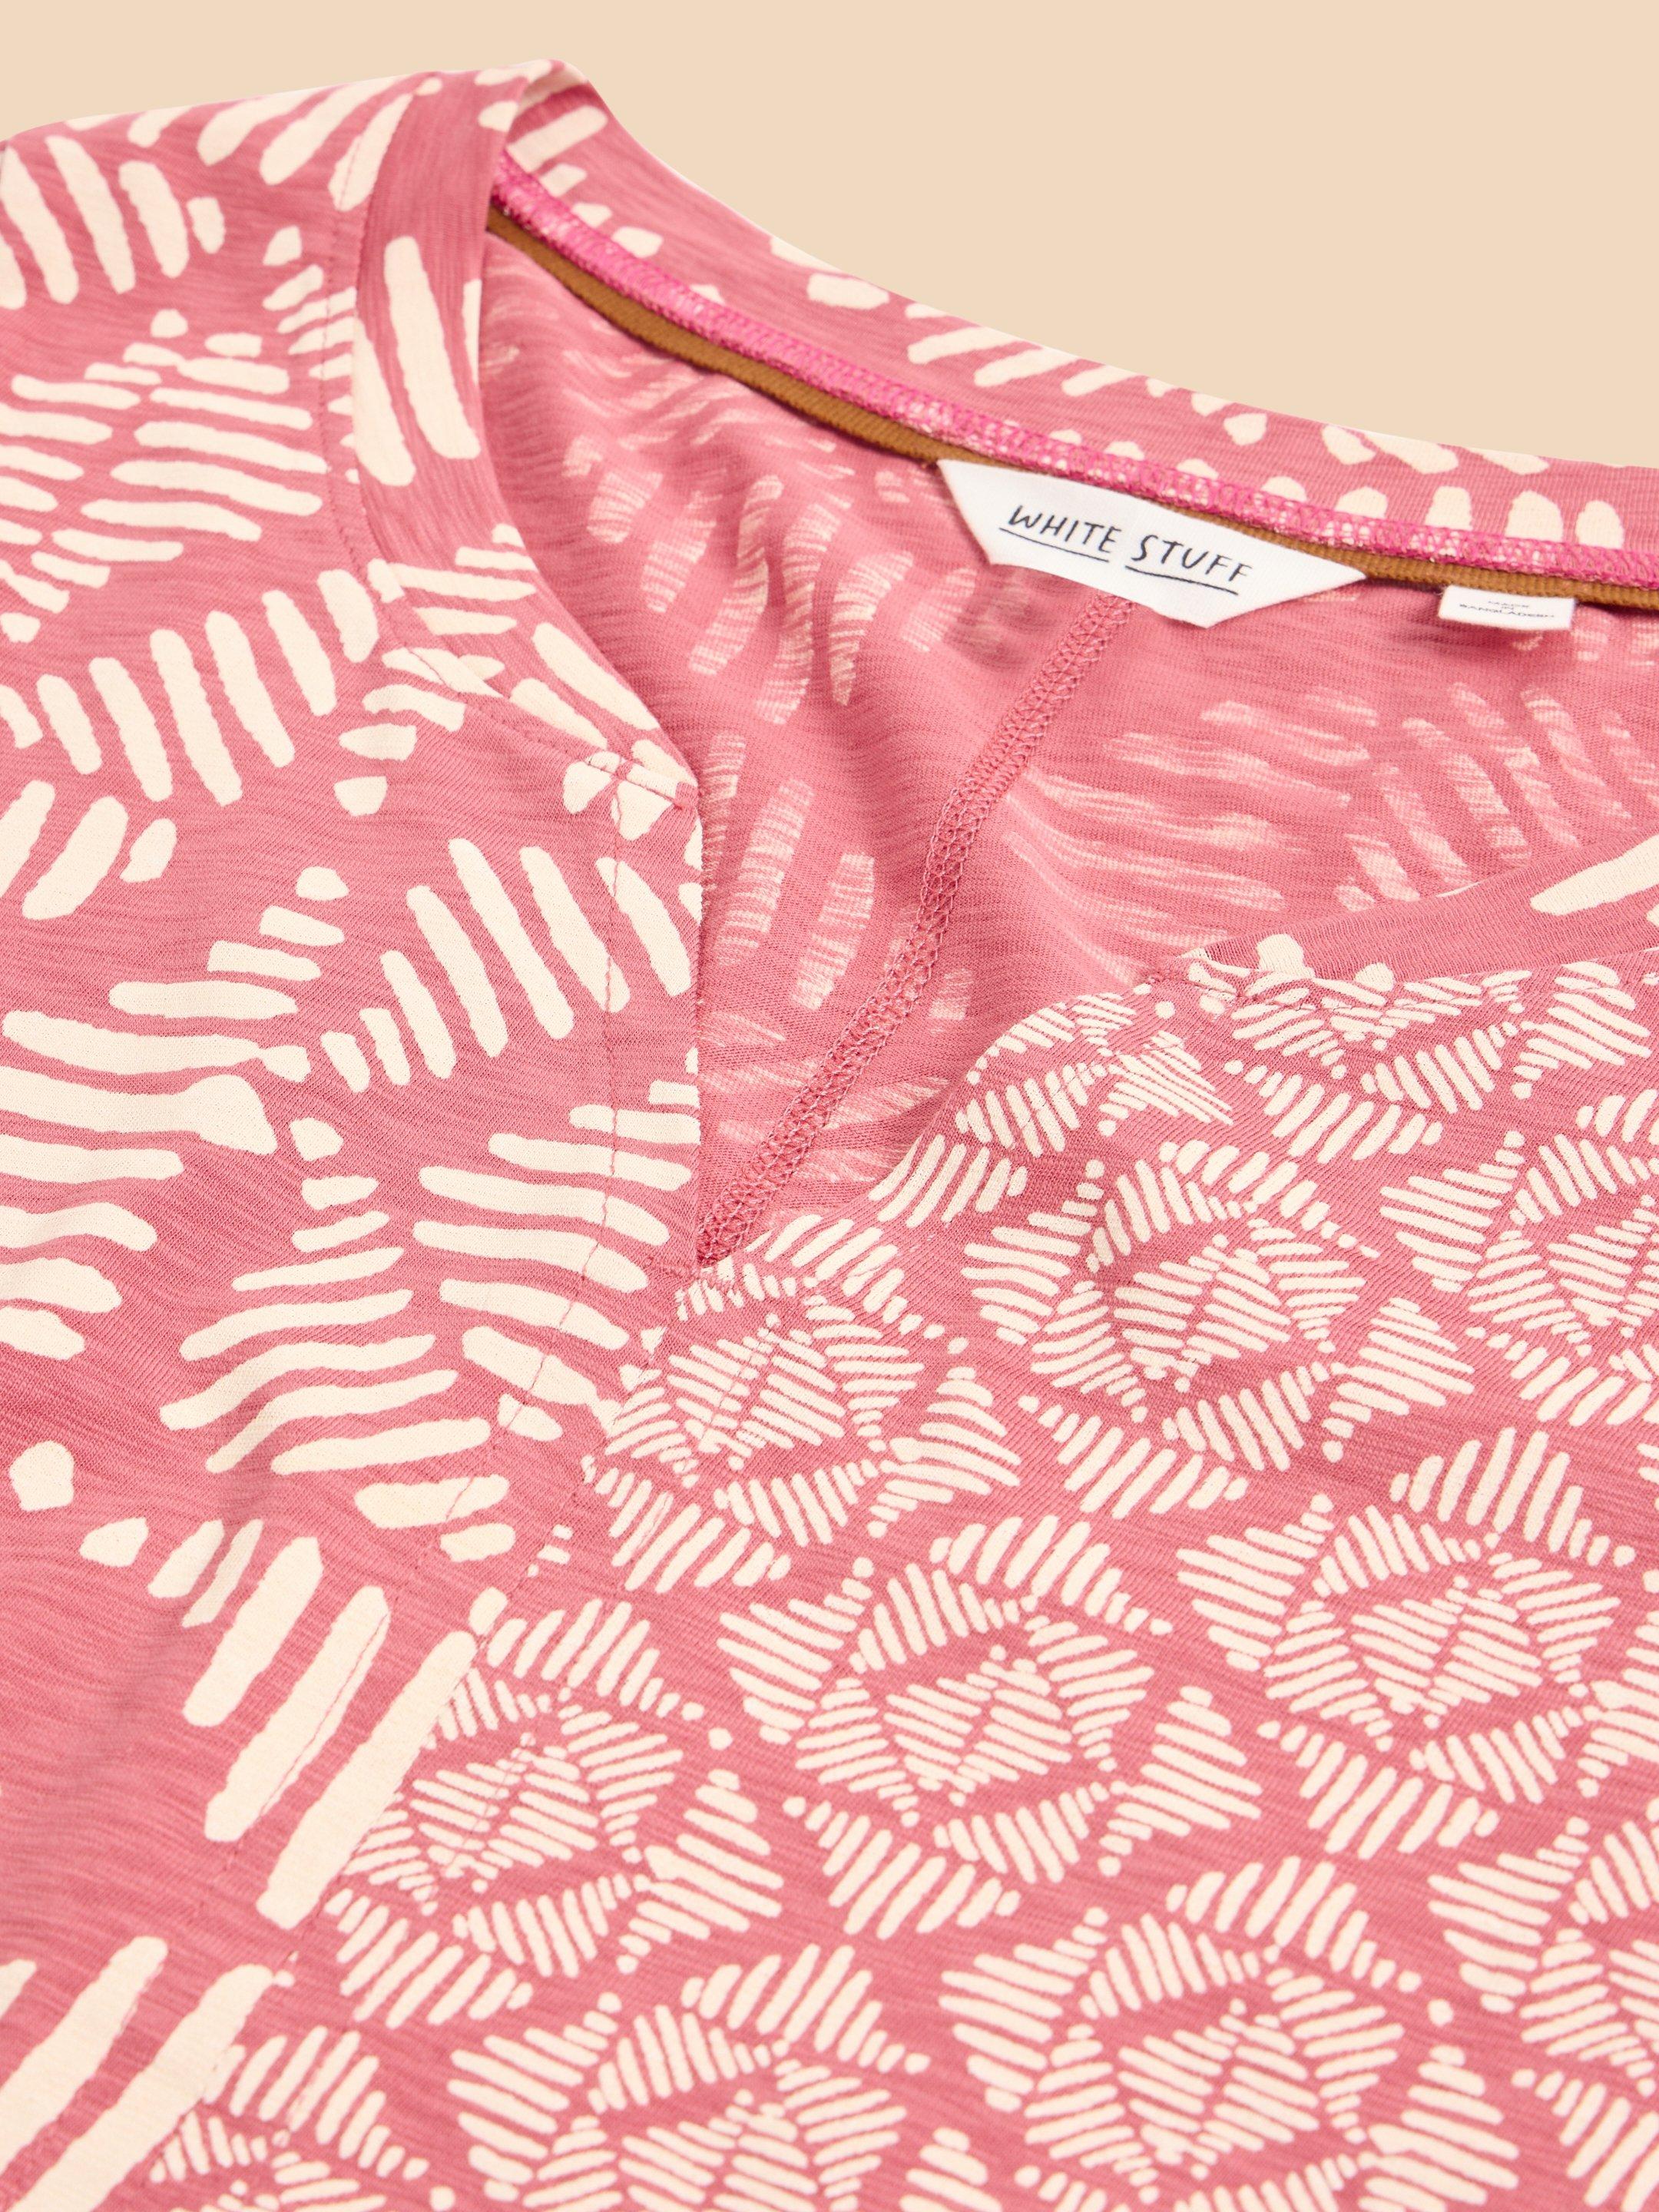 NELLY LS PRINTED TEE in PINK PR - FLAT DETAIL